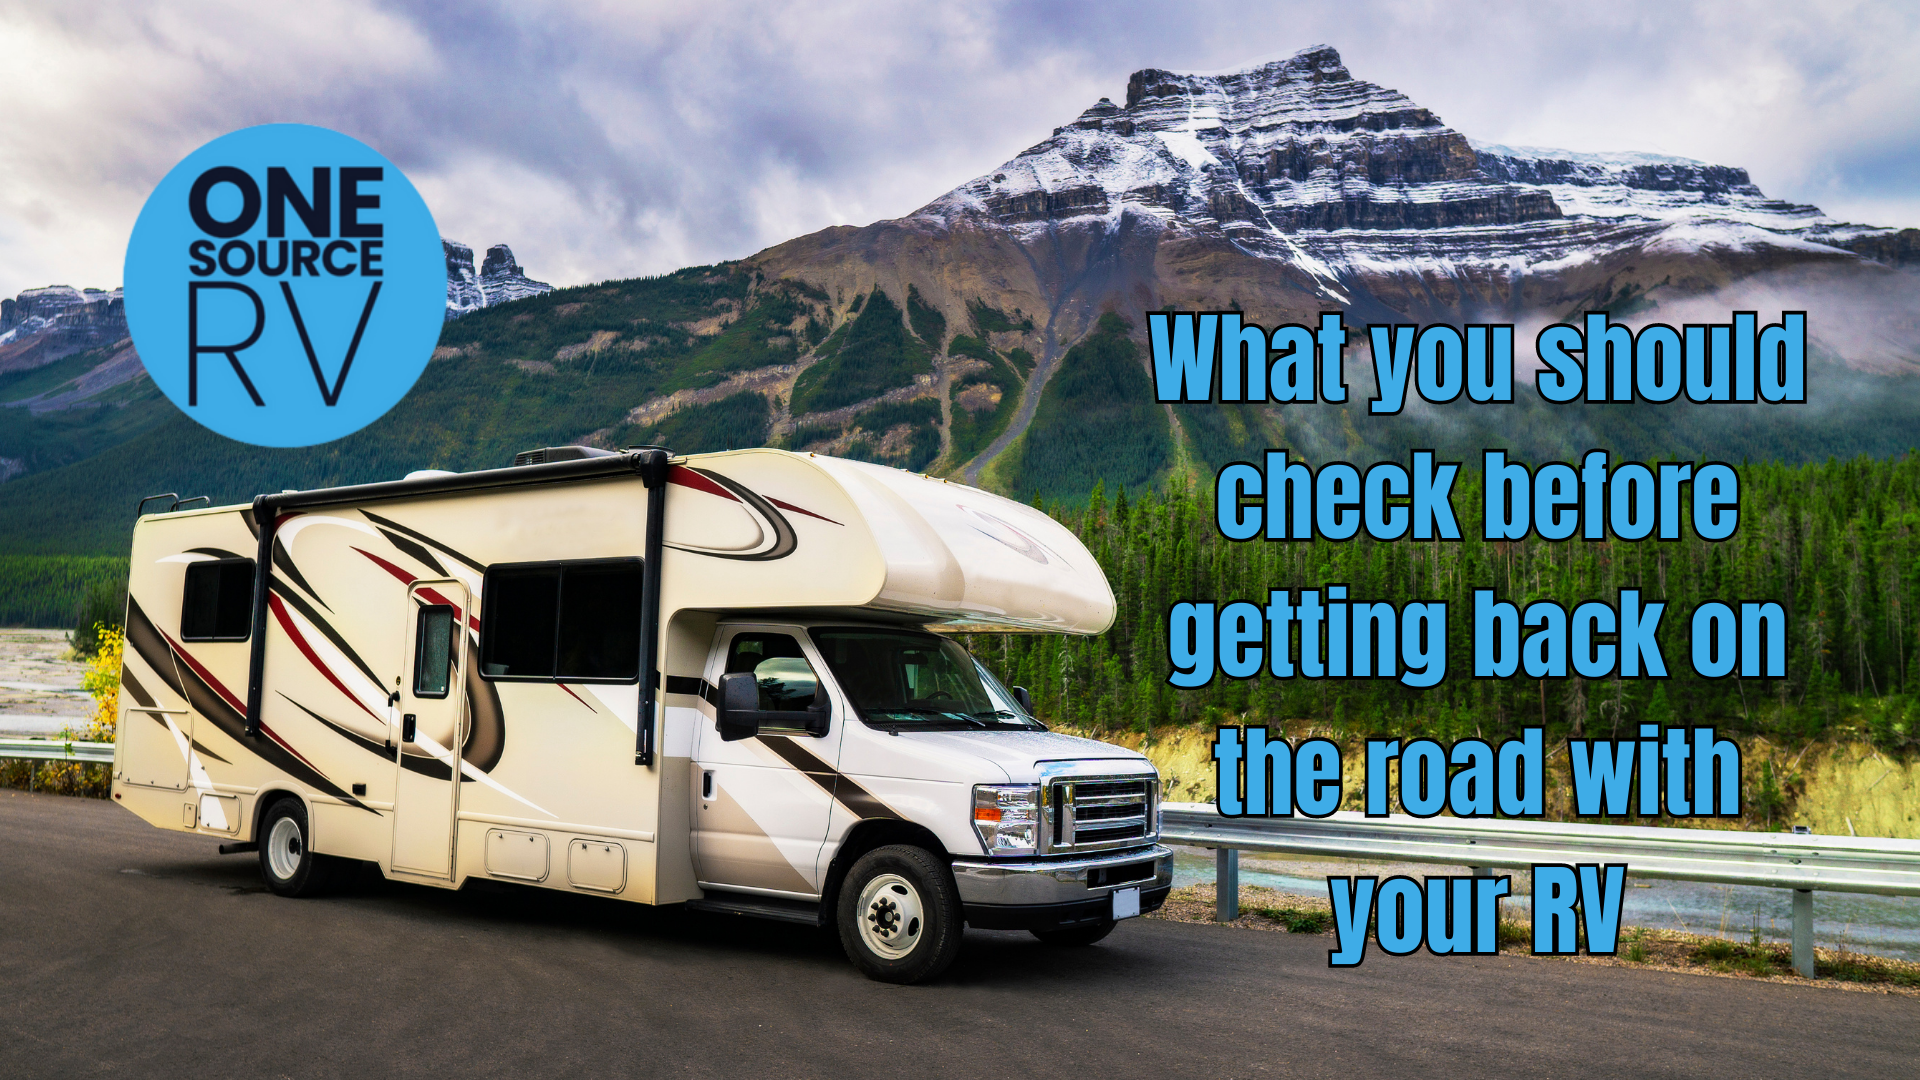 What you should check before getting back on the road with your RV